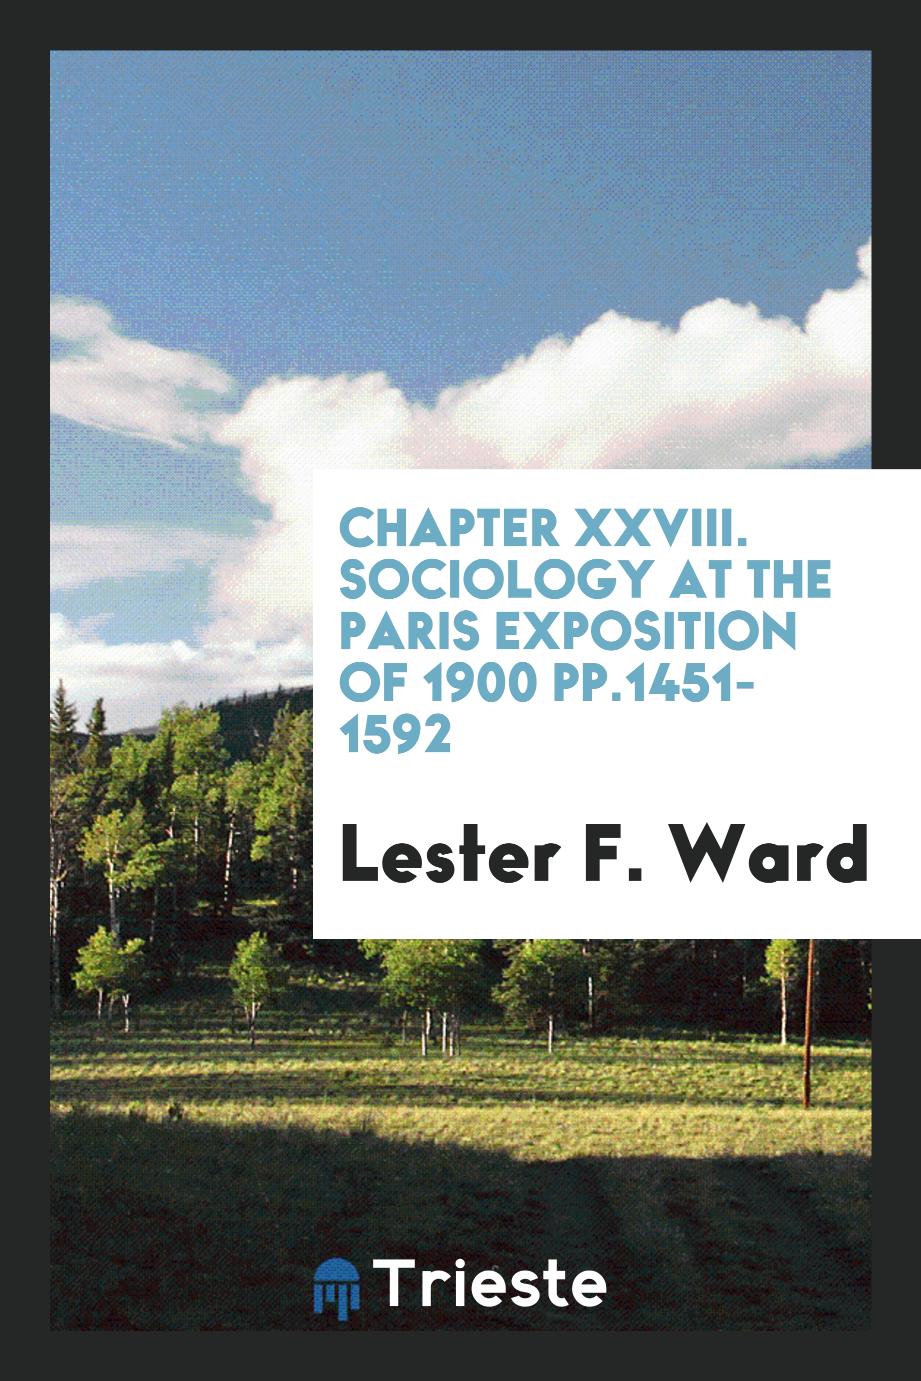 Chapter XXVIII. Sociology at the Paris Exposition of 1900 pp.1451-1592